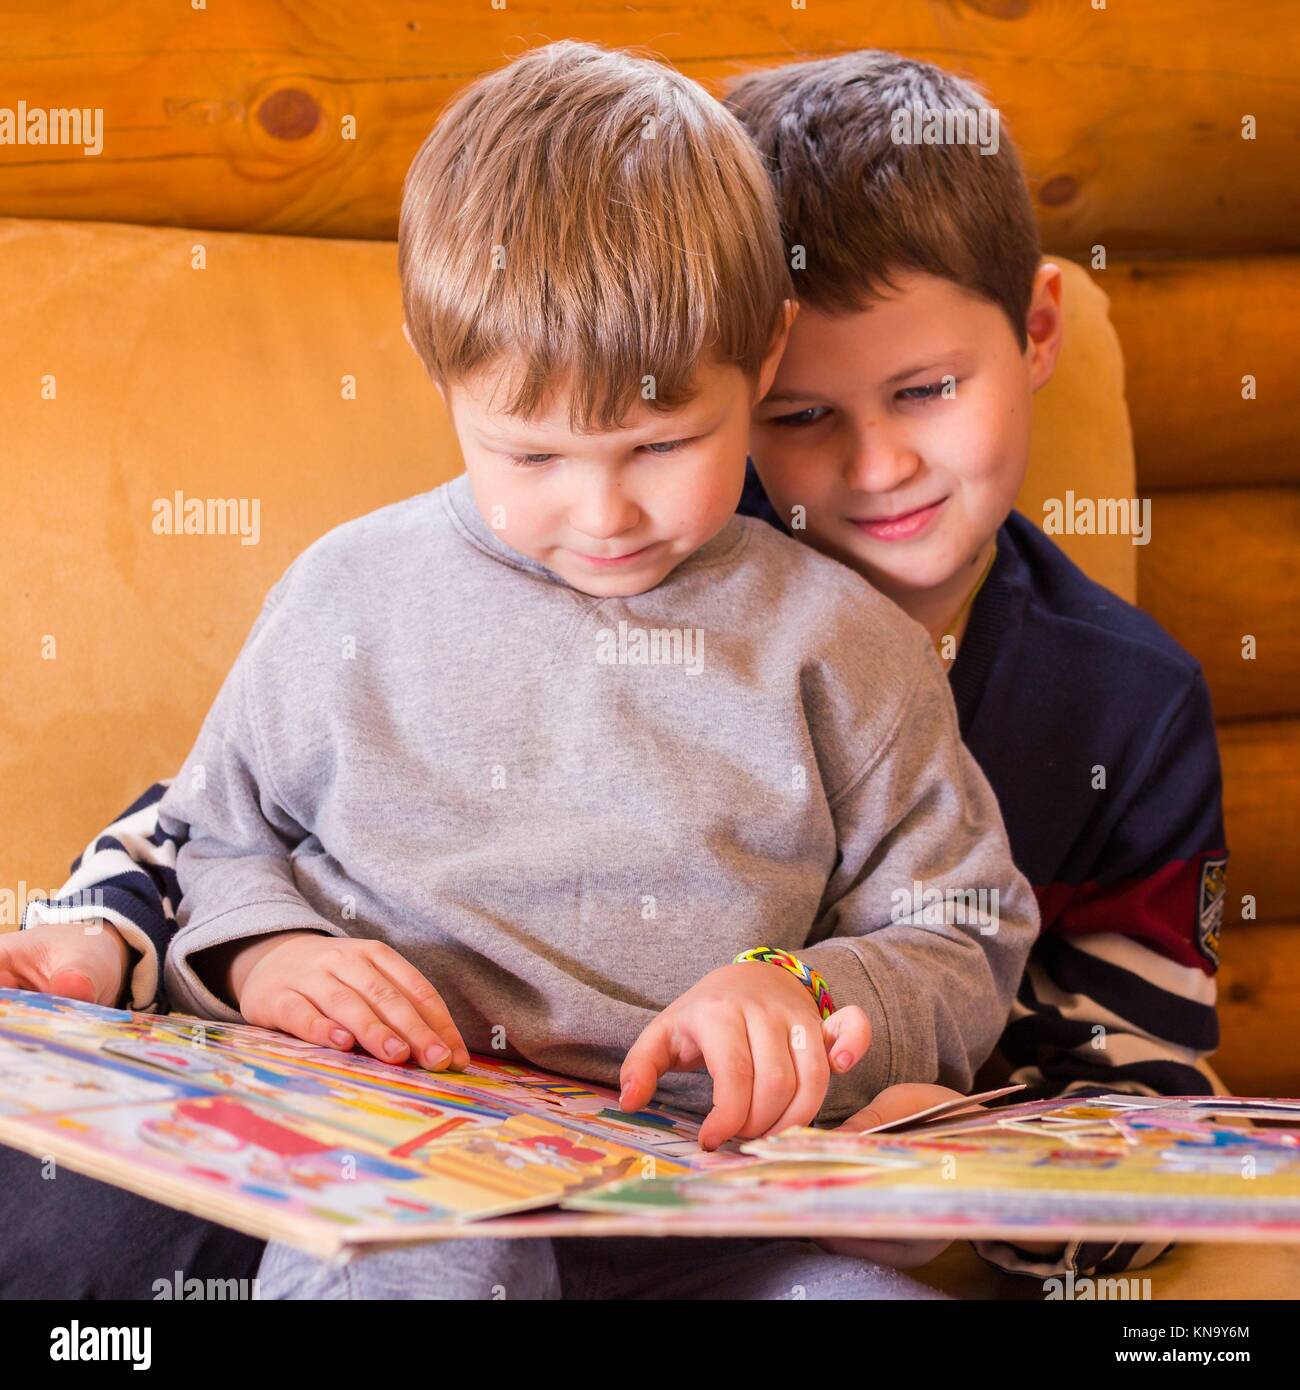 Younger brother learning to read with help of elder one. Stock Photo